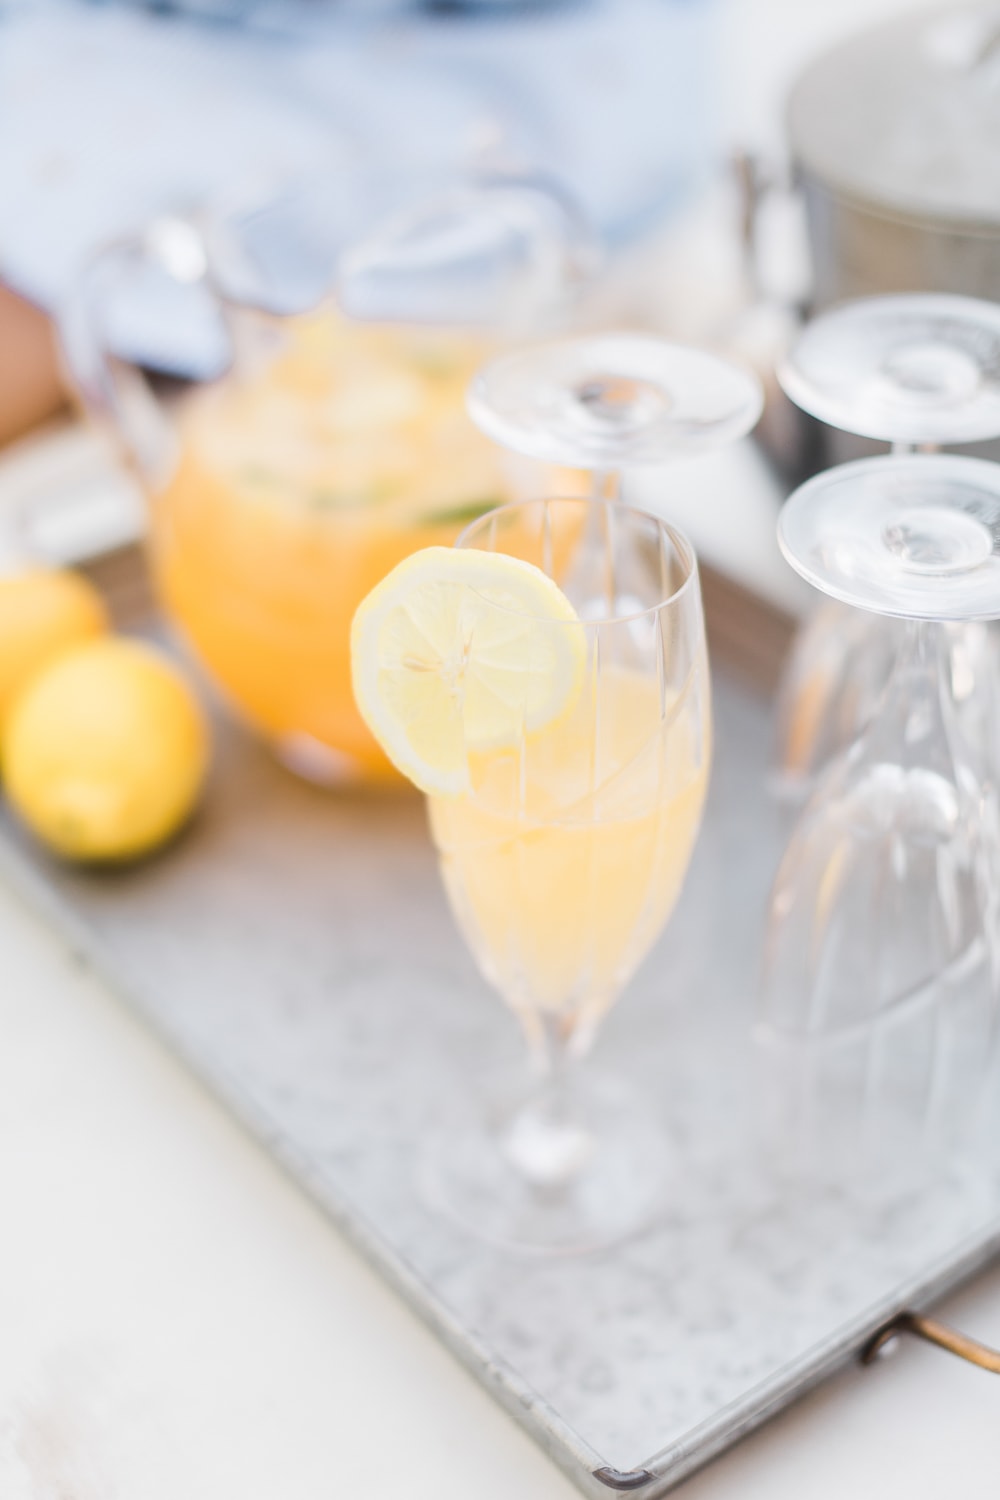 Sparkling punch recipe alcoholic by blogger Stephanie Ziajka on Diary of a Debutante